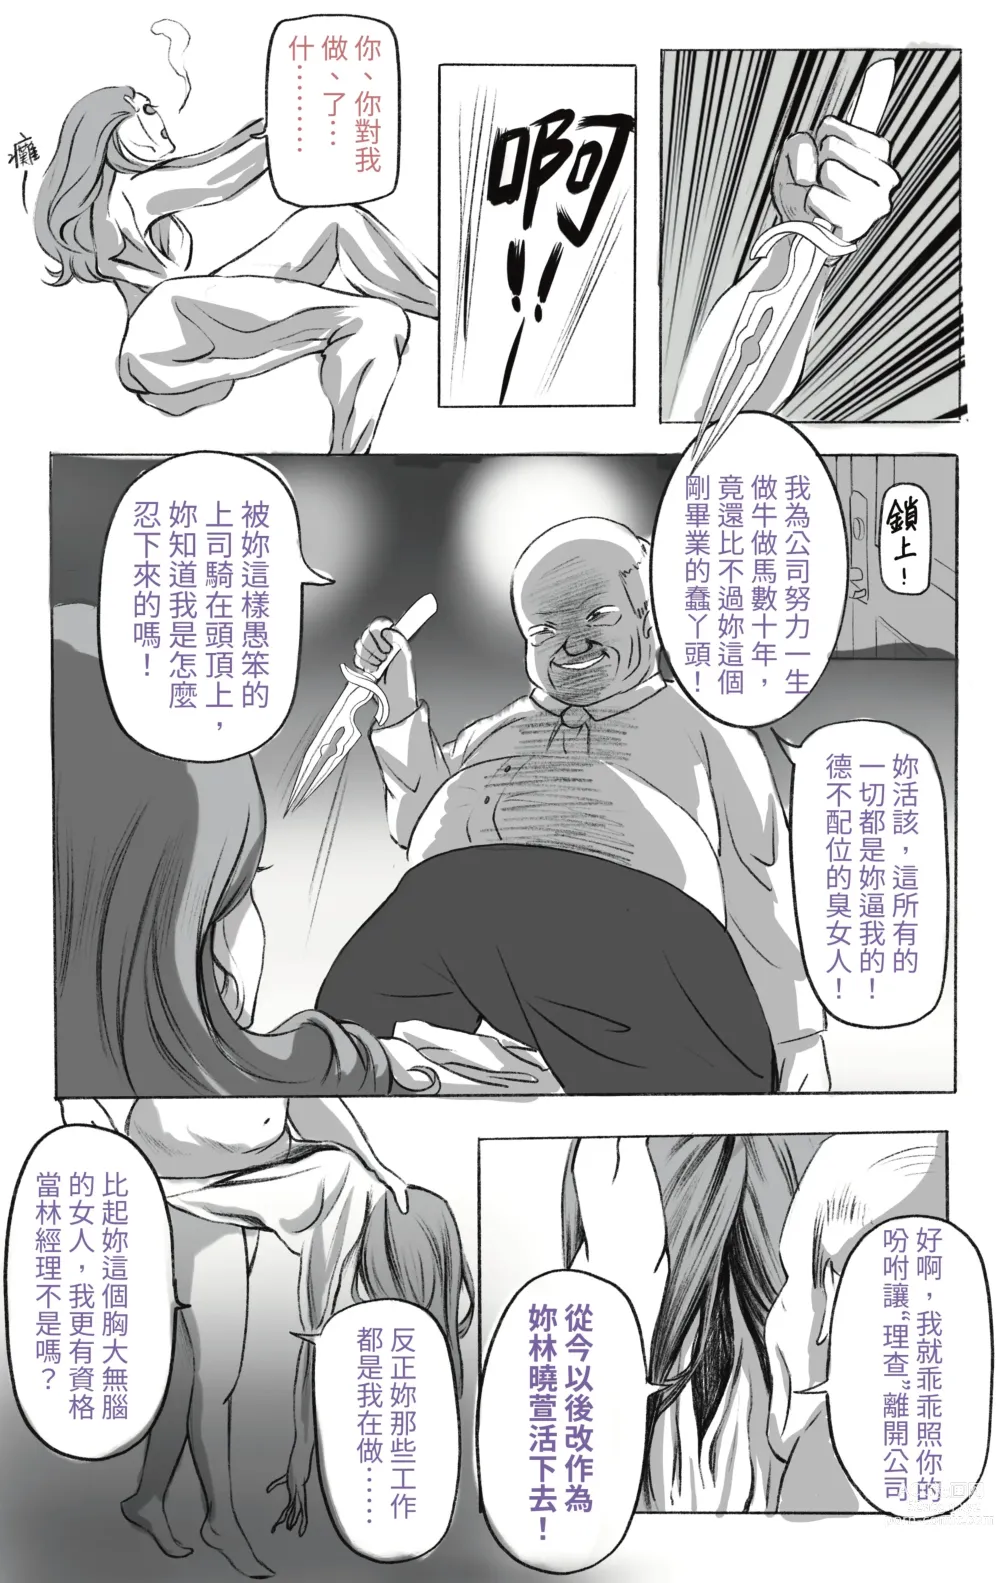 Page 2 of doujinshi 主管的秘密